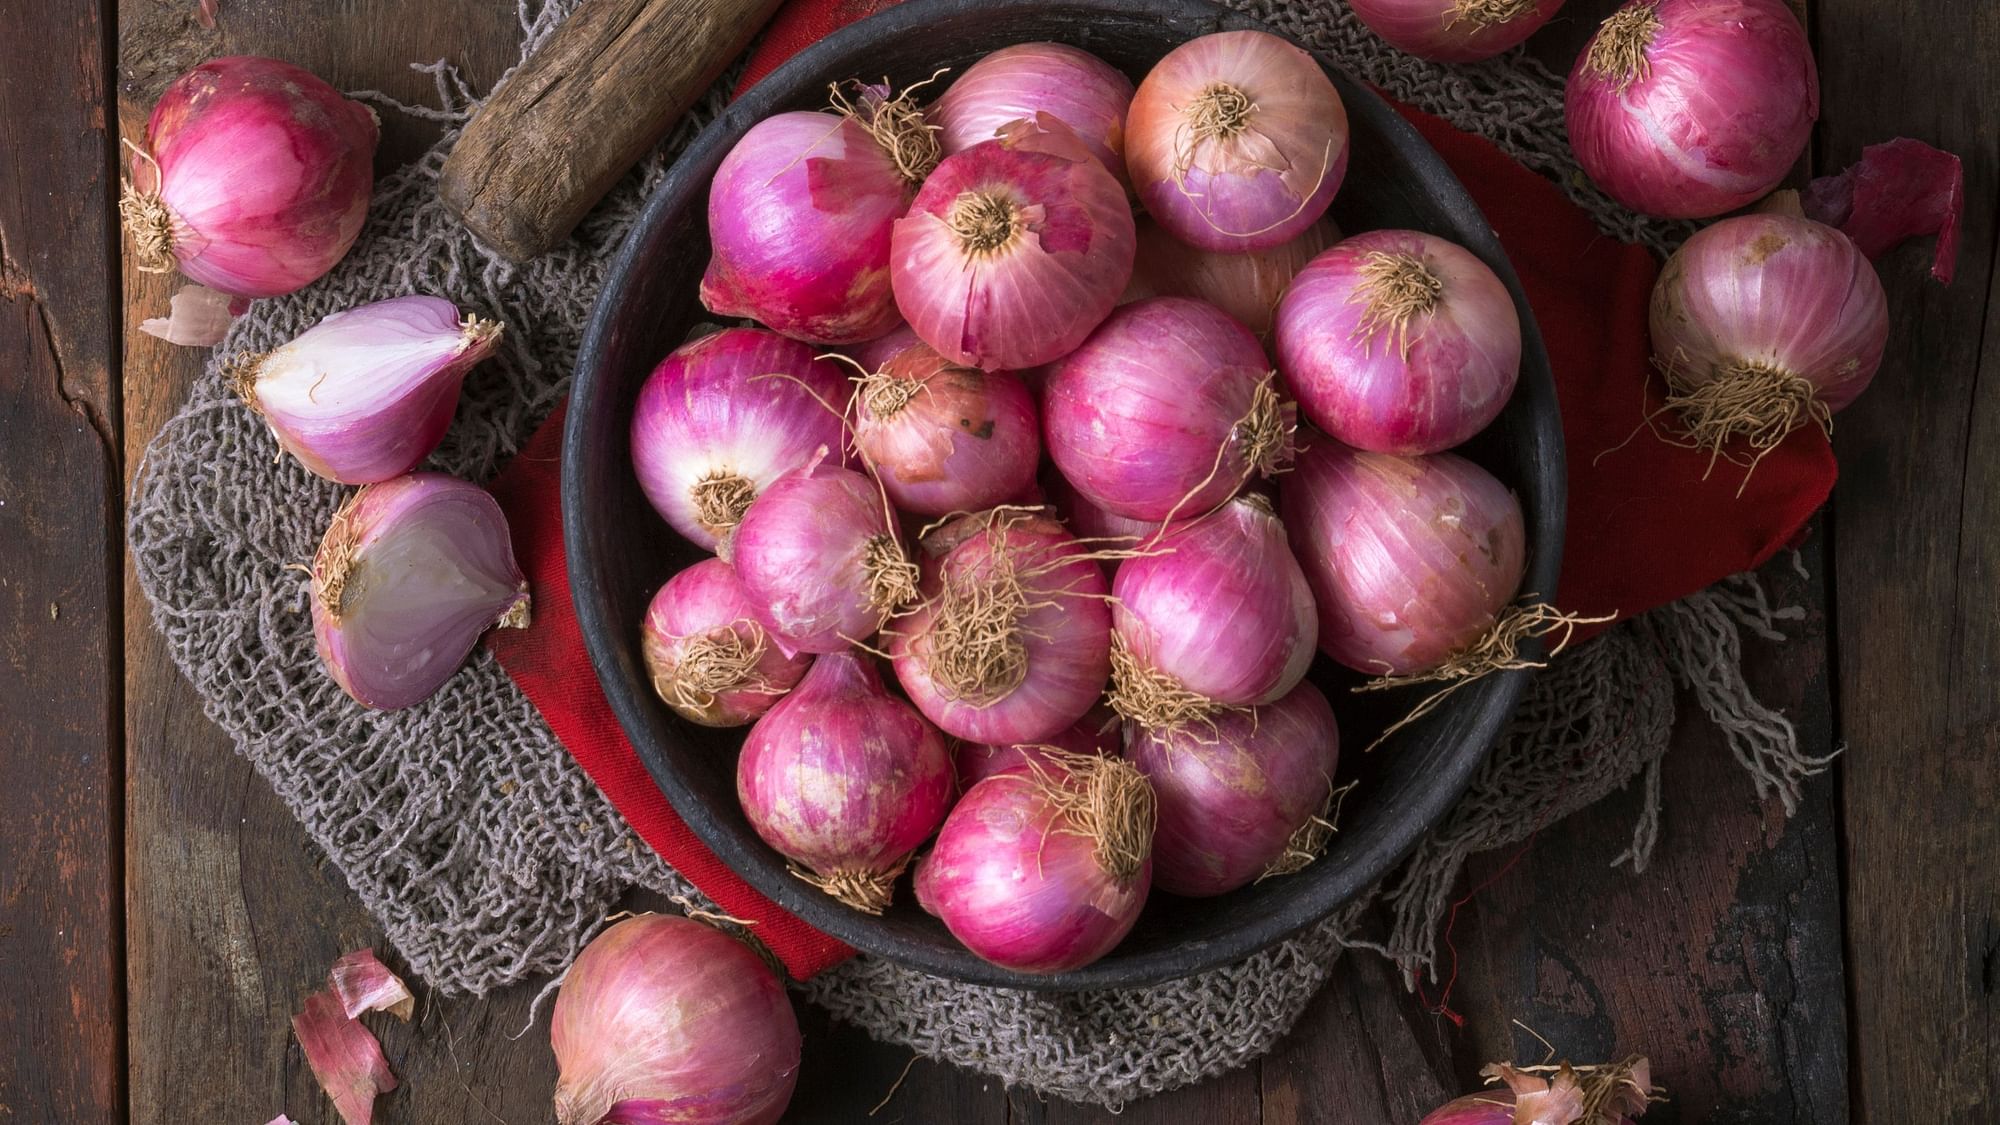 Amid soaring onion prices, a trader claimed in Madhya Pradesh that his consignment of the bulb, worth Rs 20 to 22 lakh, has possibly been stolen.